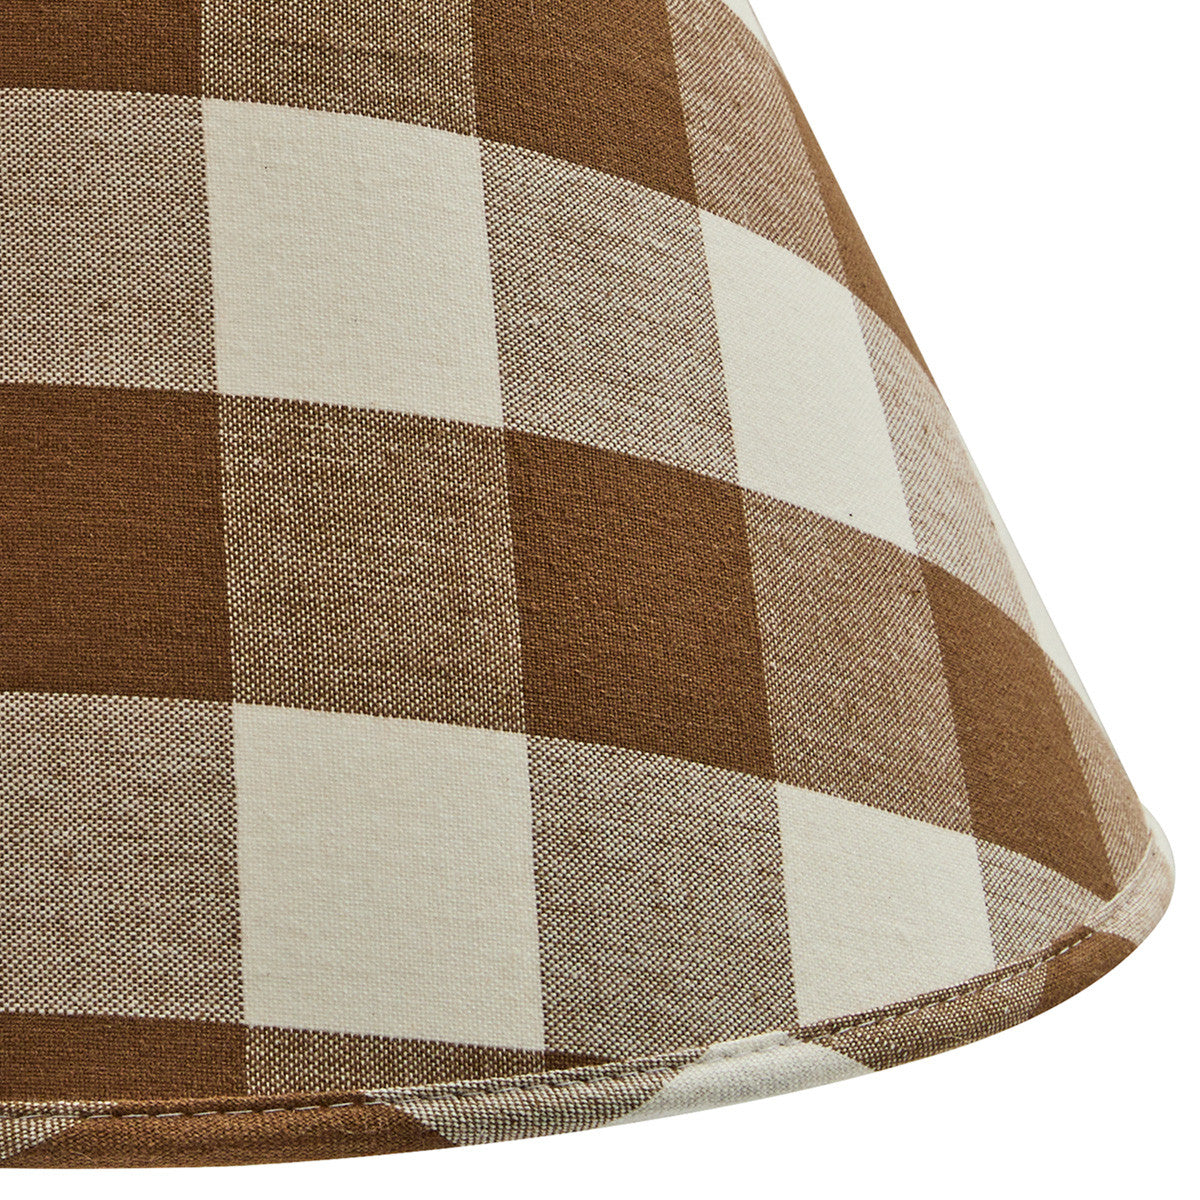 Wicklow Check Brown & Cream Lamp Shade - 14" Set of 2 Park Designs